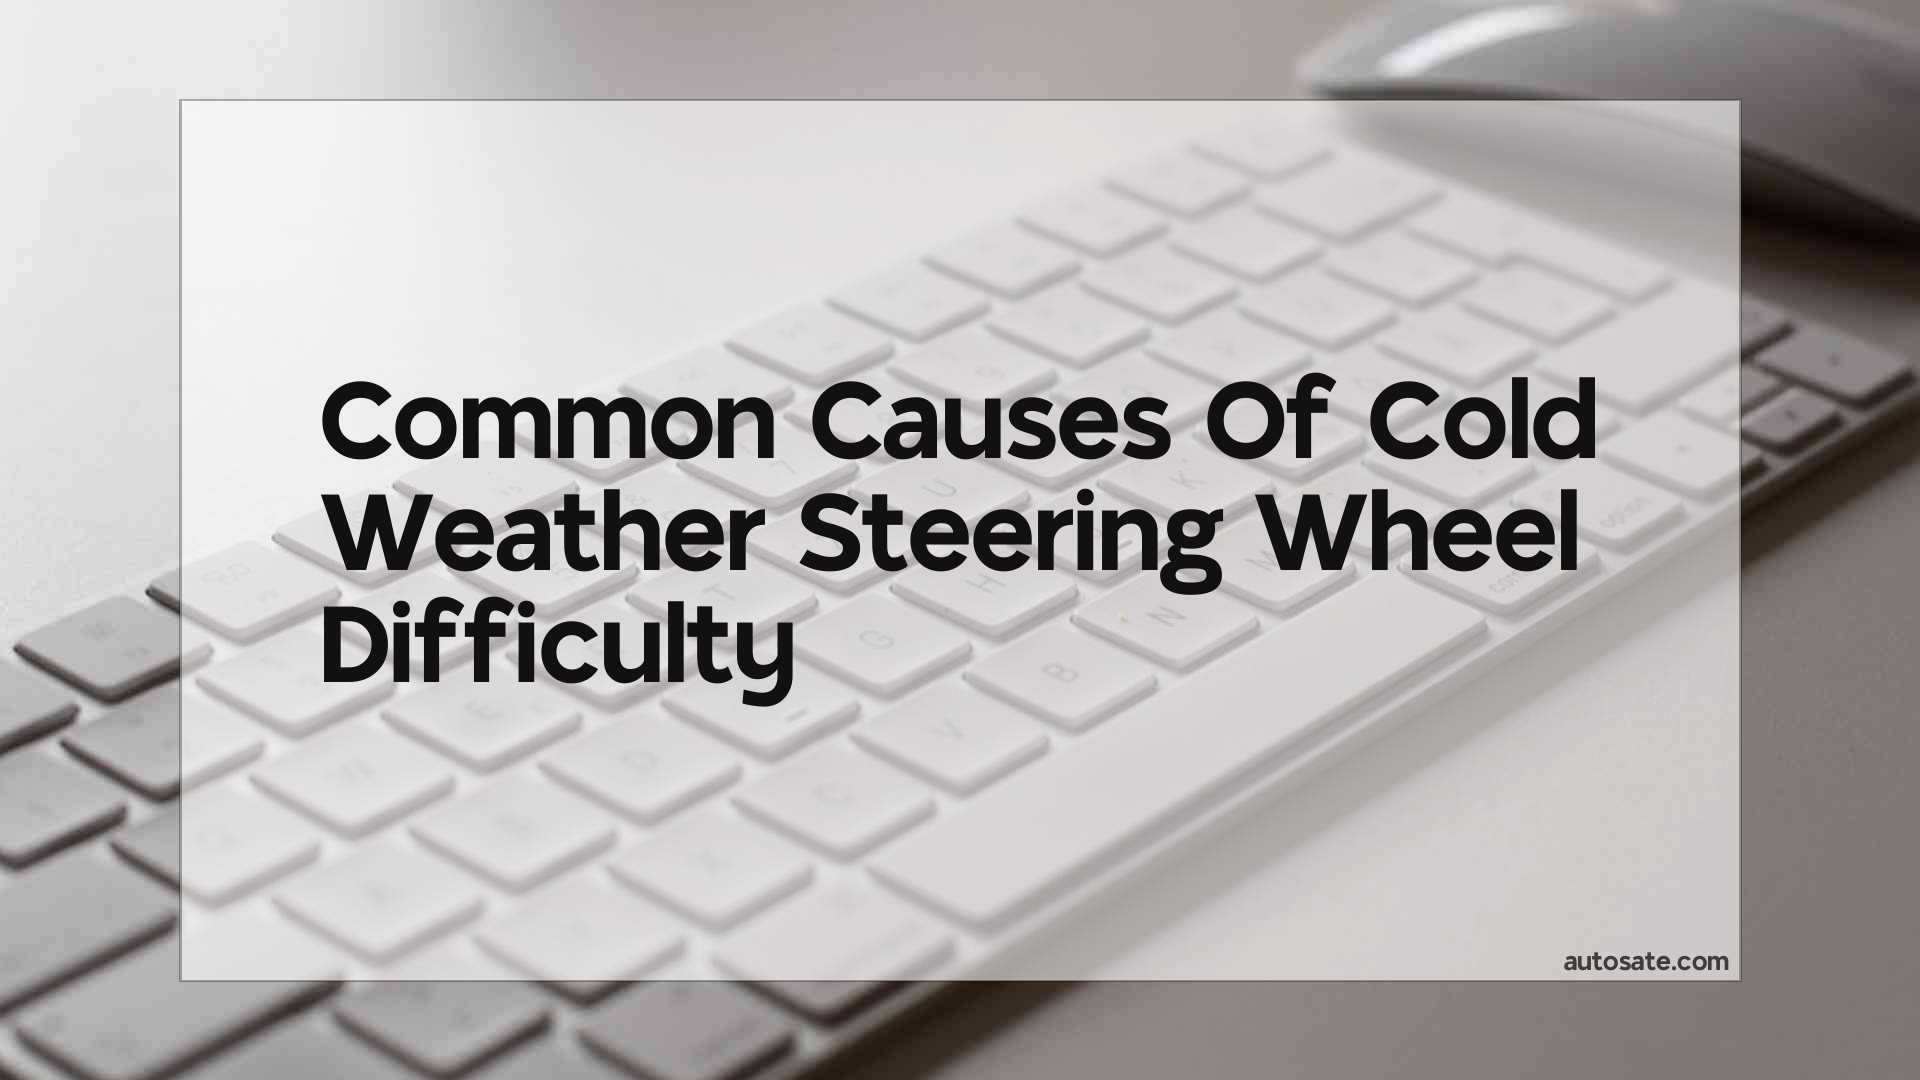 Common Causes Of Cold Weather Steering Wheel Difficulty